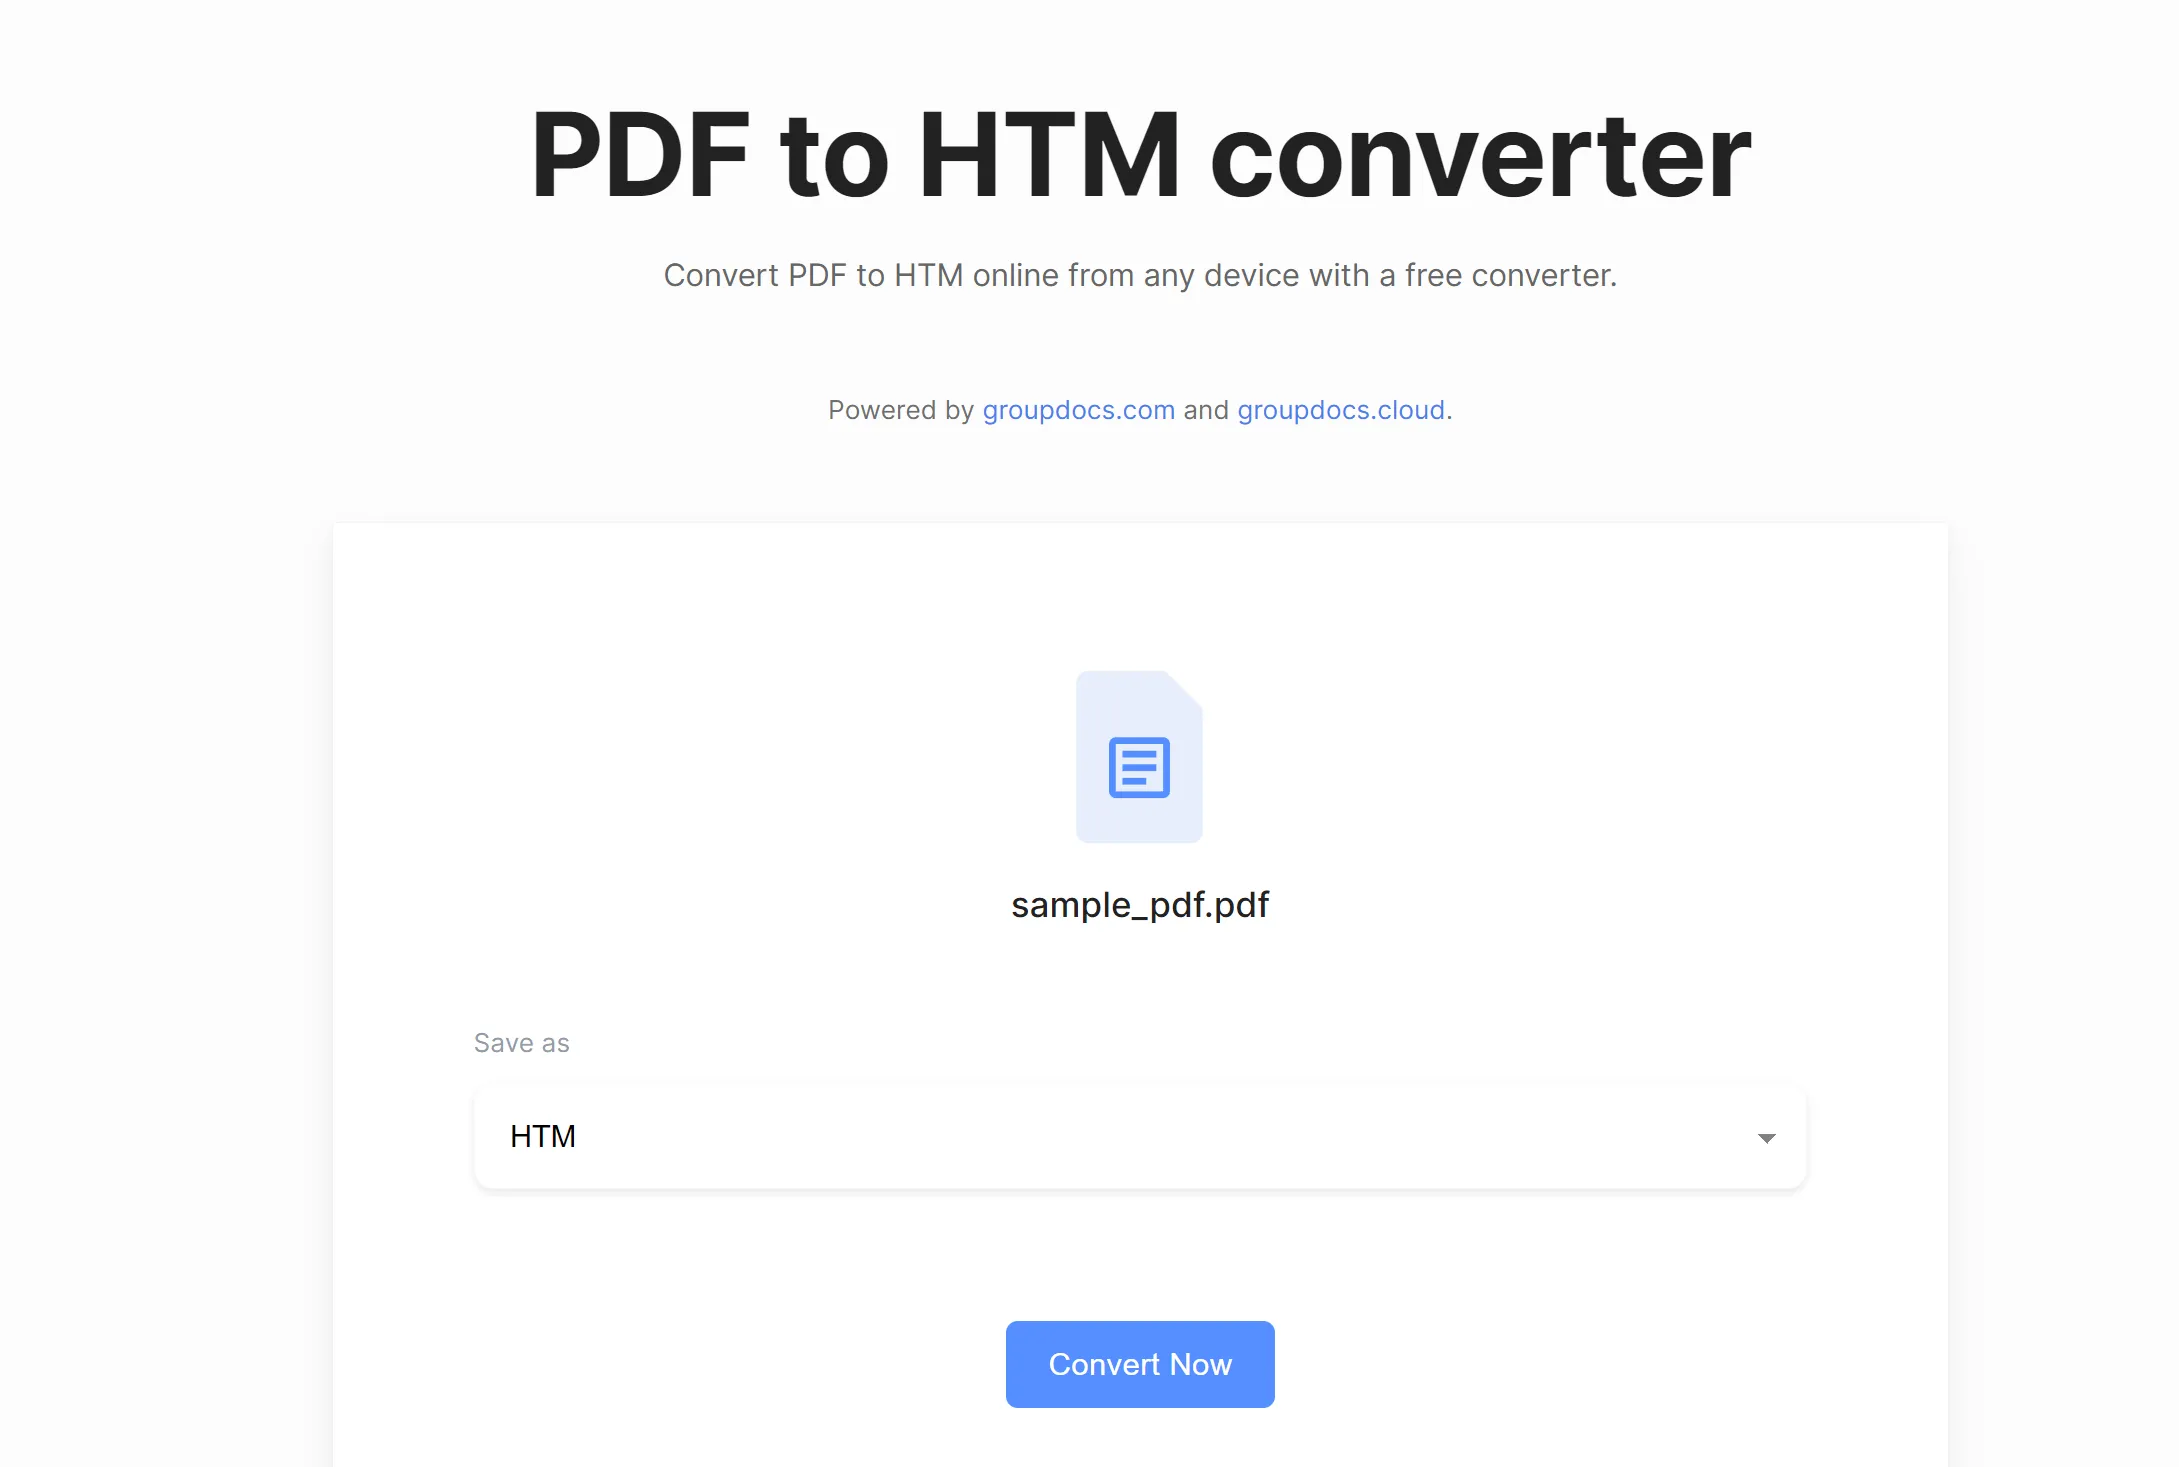 Click on the convert now to convert PDF to HTM with Groupdocs